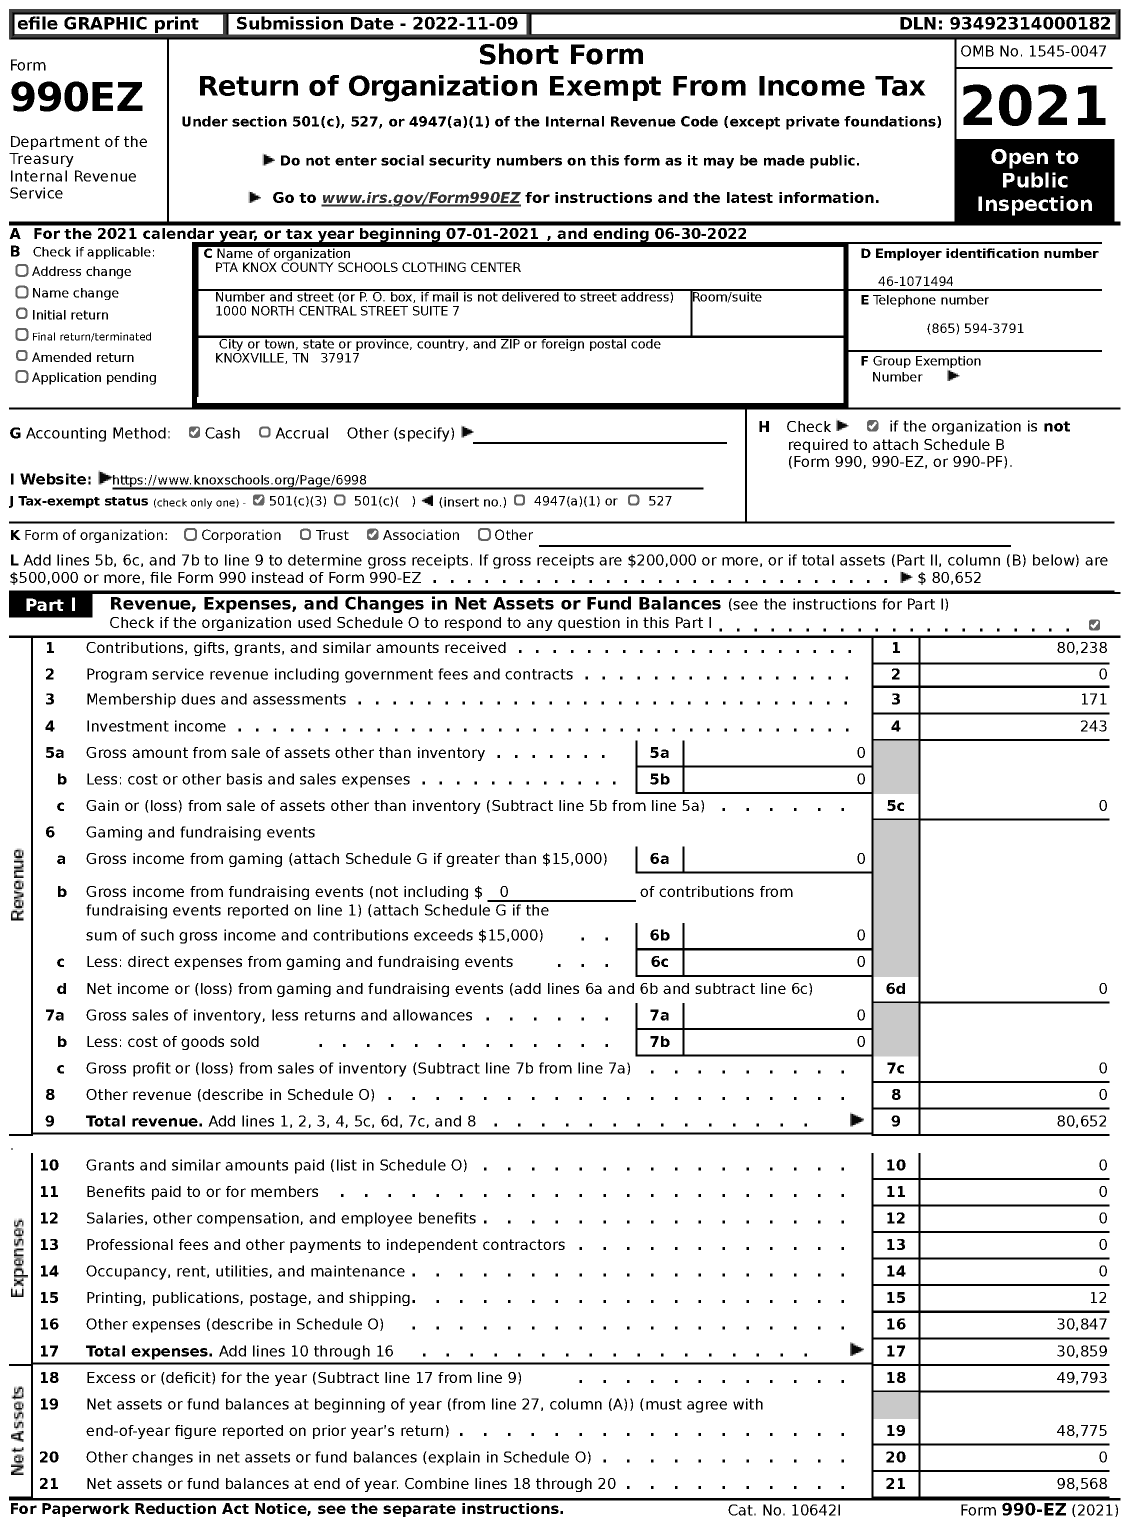 Image of first page of 2021 Form 990EZ for PTA Tennessee Congress of Parents Teachers Knox County Schools Clothing Center